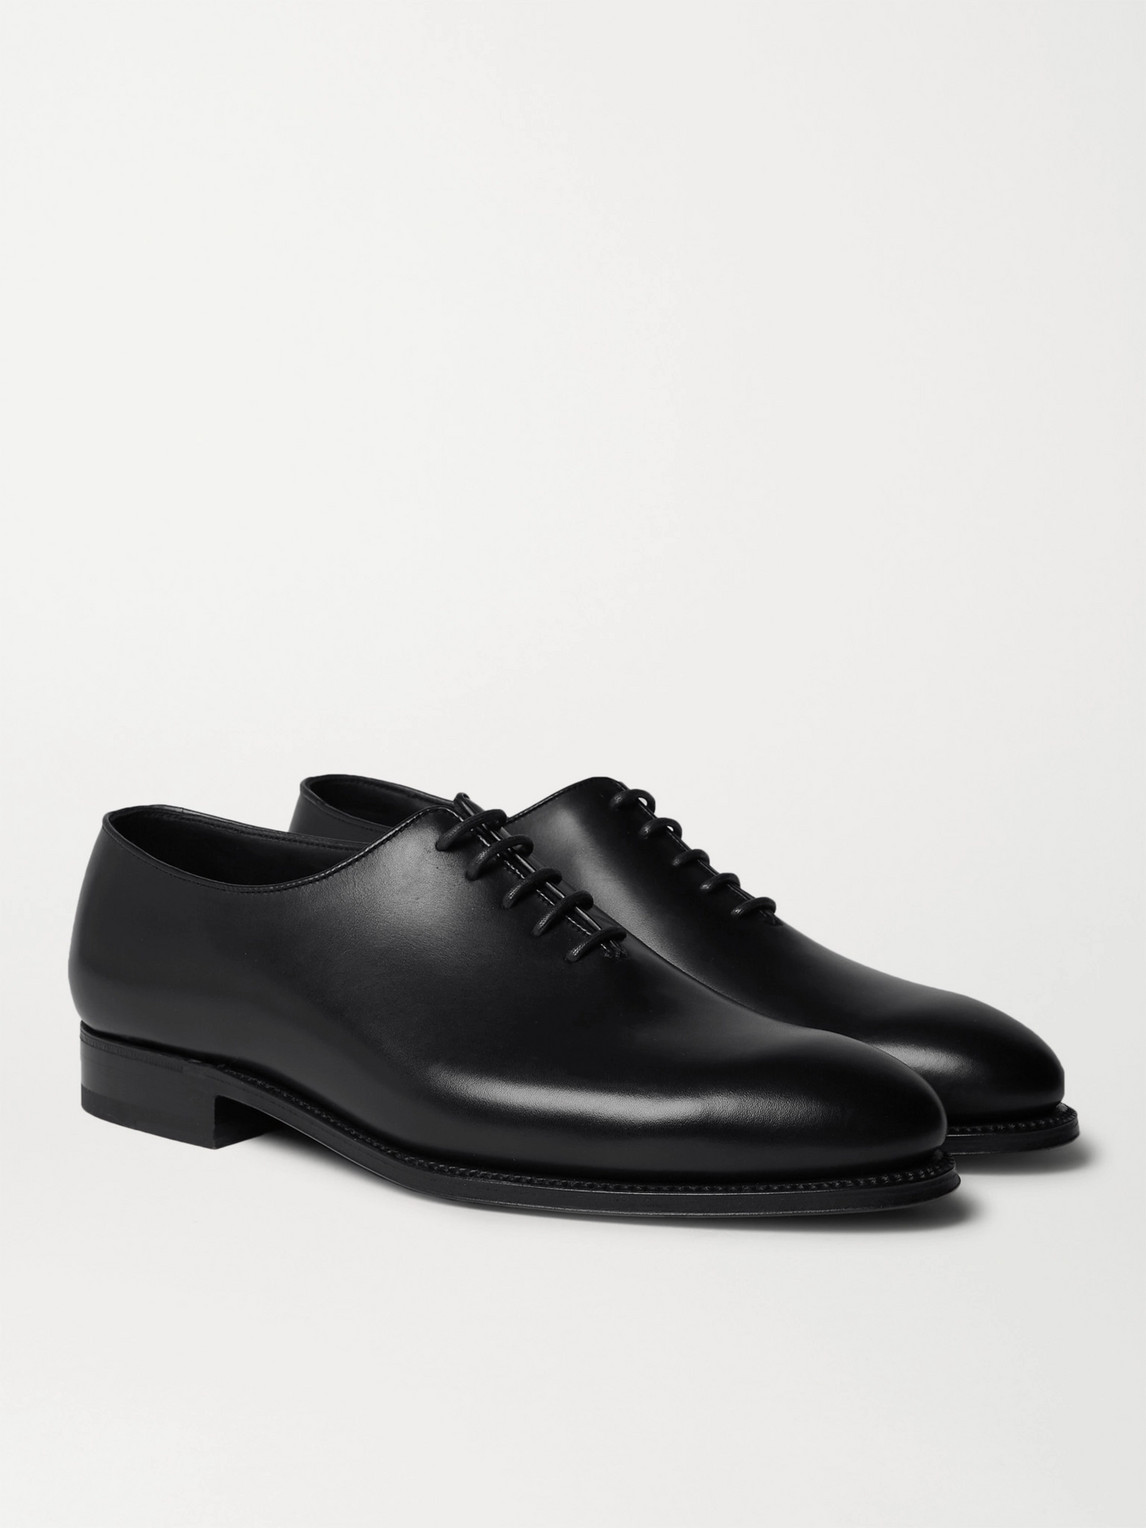 Jm Weston Whole-cut Leather Oxford Shoes In Black